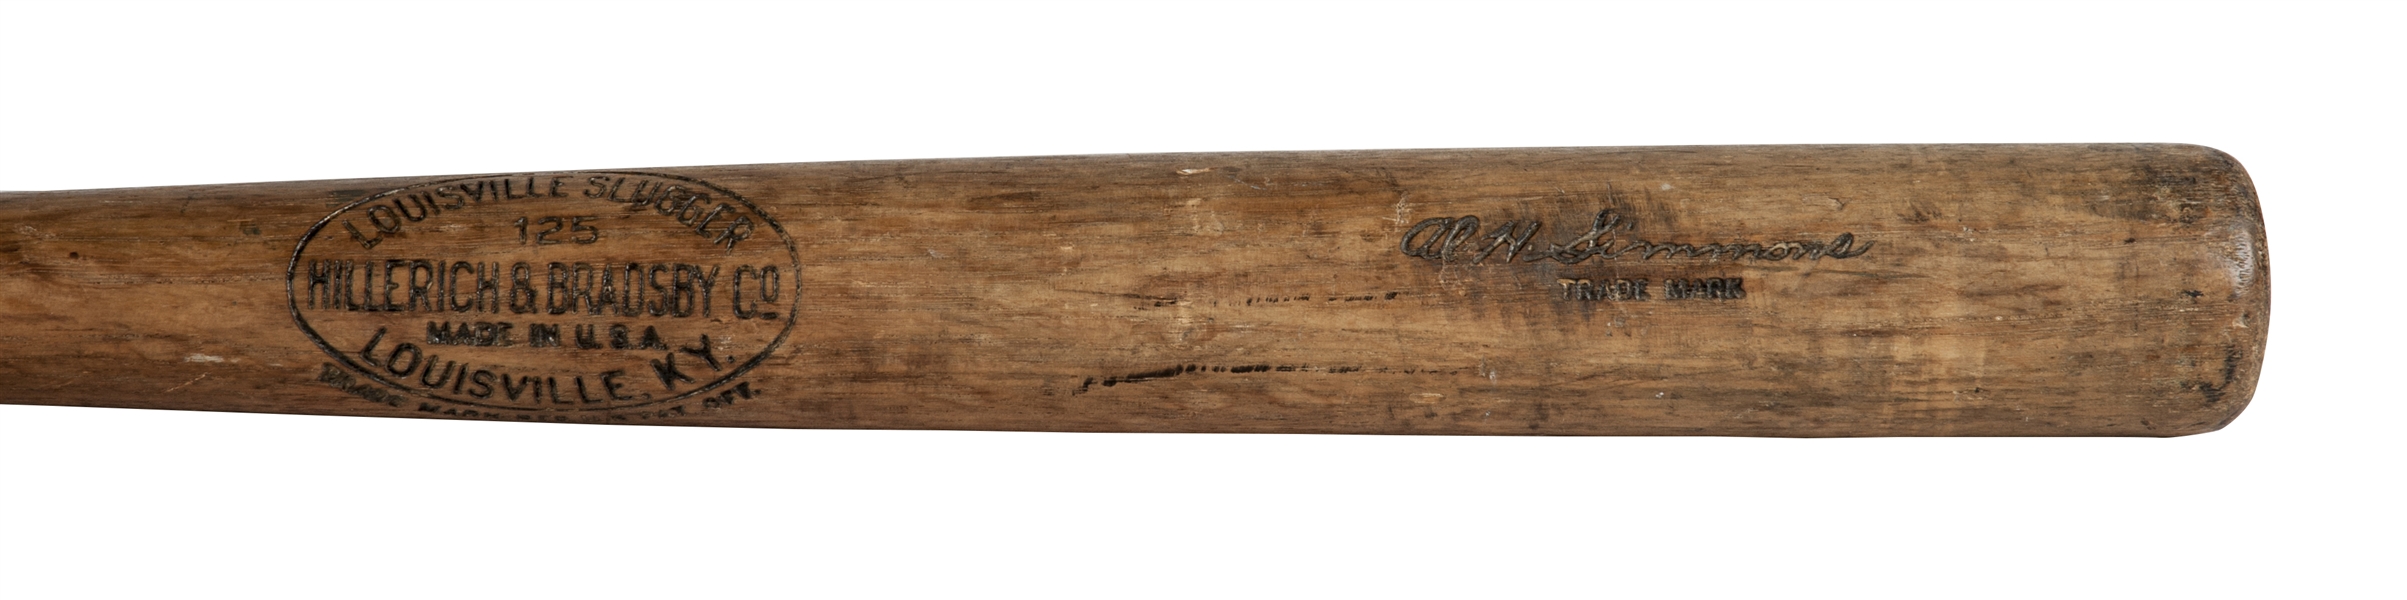 Outstanding 1931 Al Simmons Game Used Hillerich & Bradsby Bat from Batting Crown Season (PSA/DNA GU 9.5) Originates from Al Simmons Estate